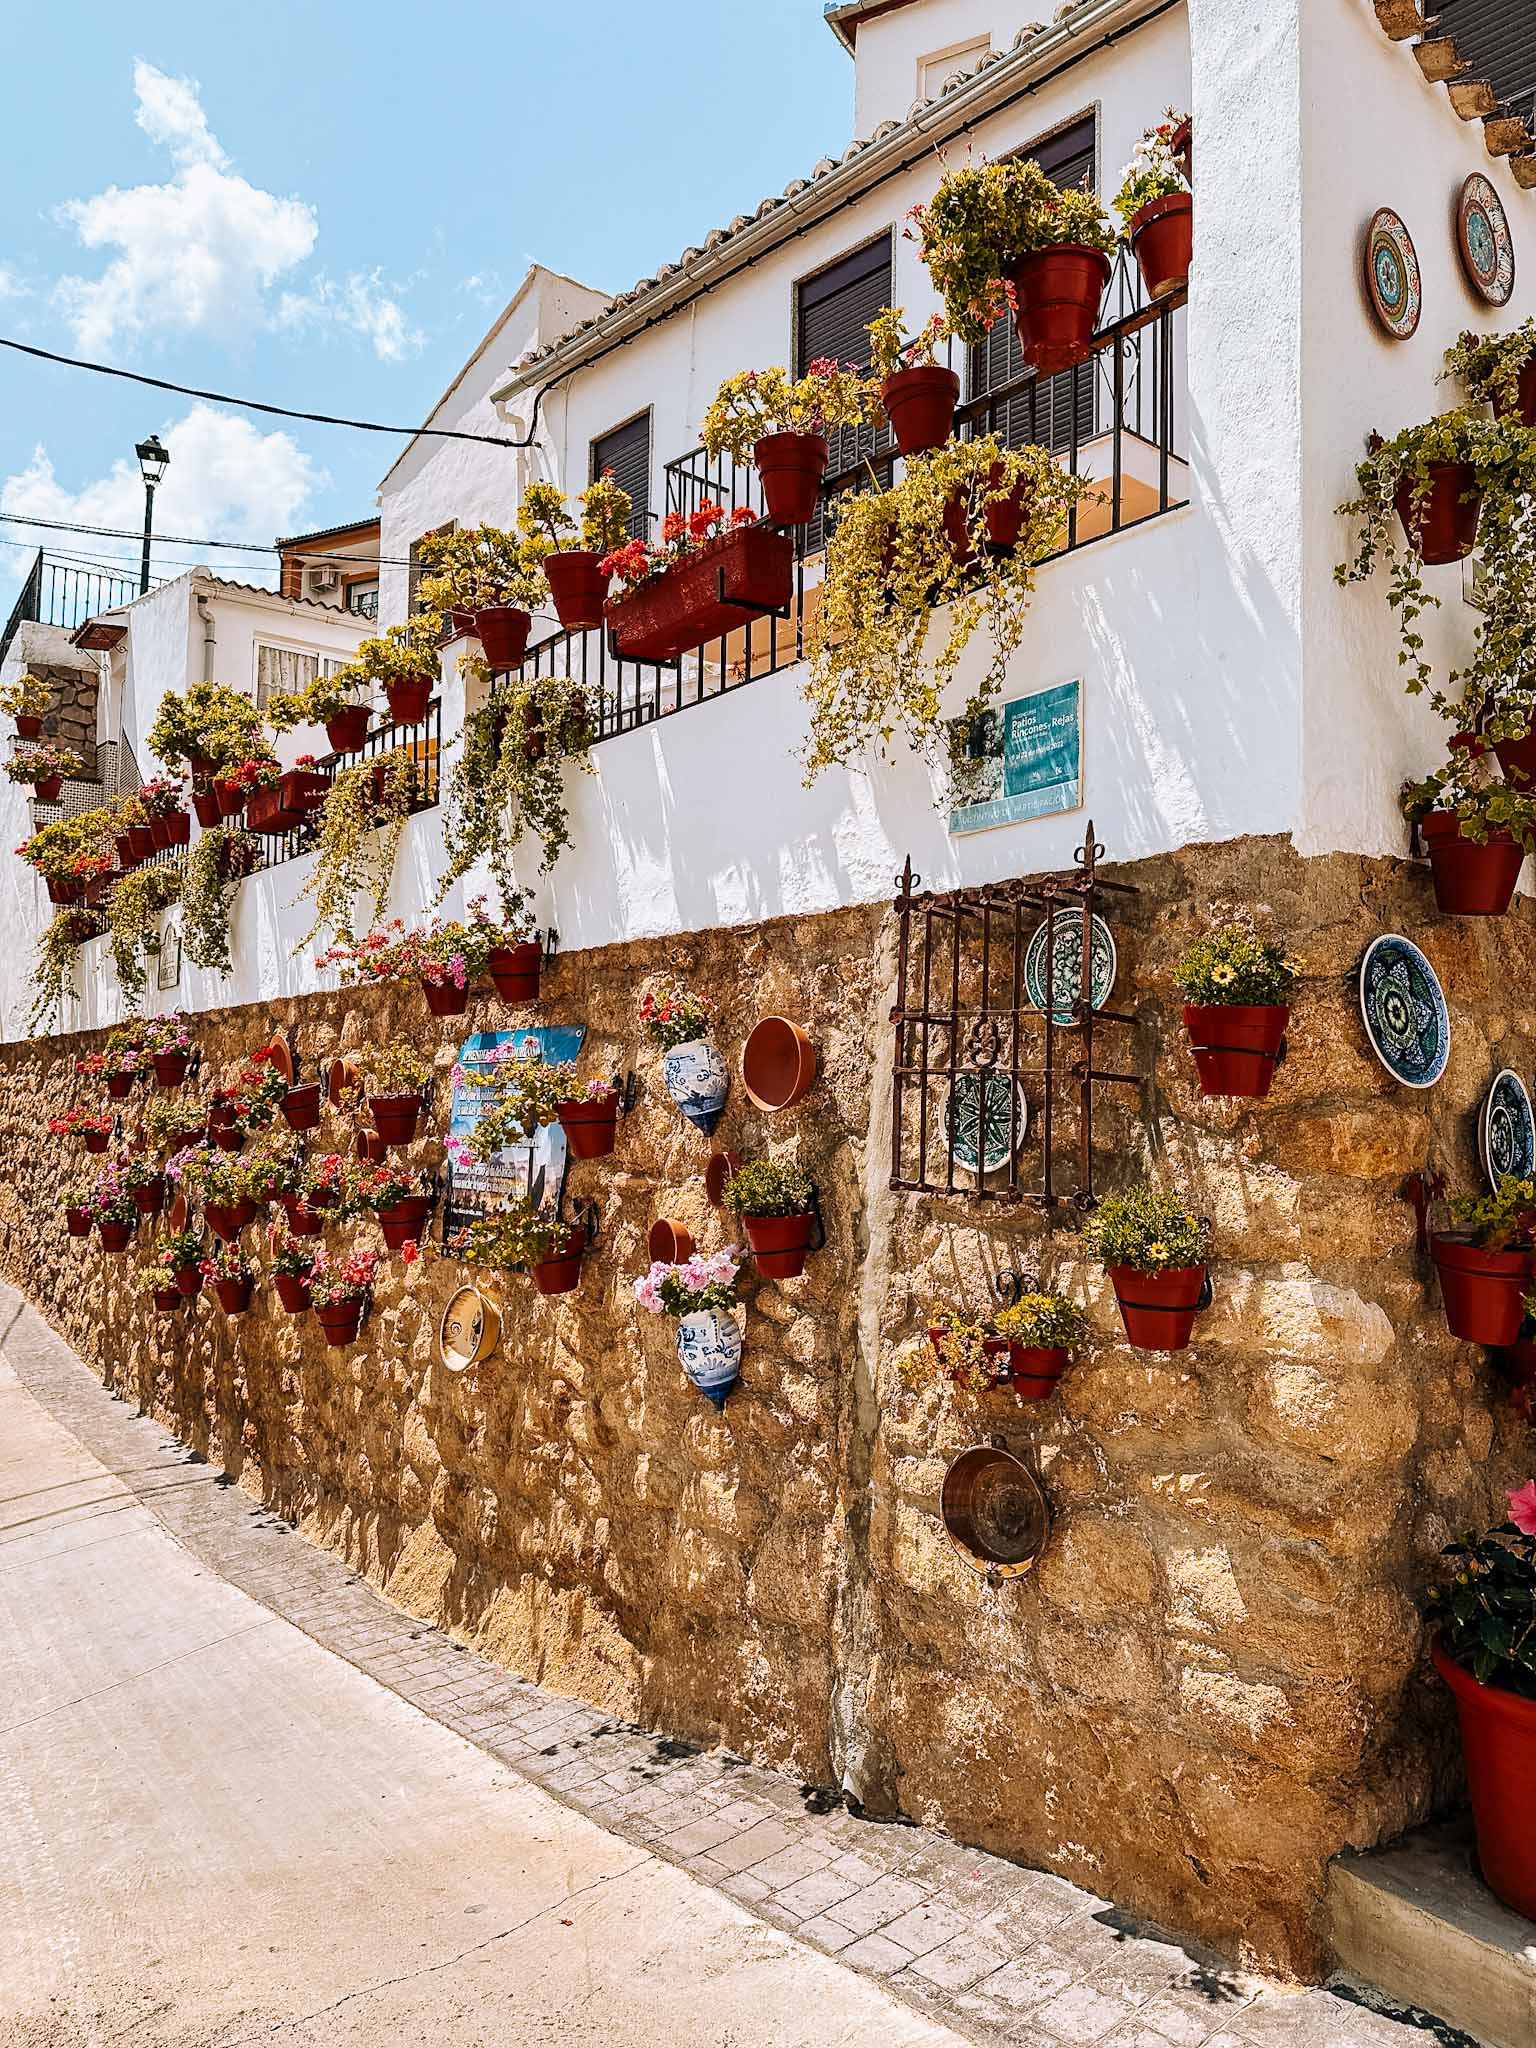 Iznajar village, Cordoba - things to do in the hidden flower village in the mountains of Andalusia